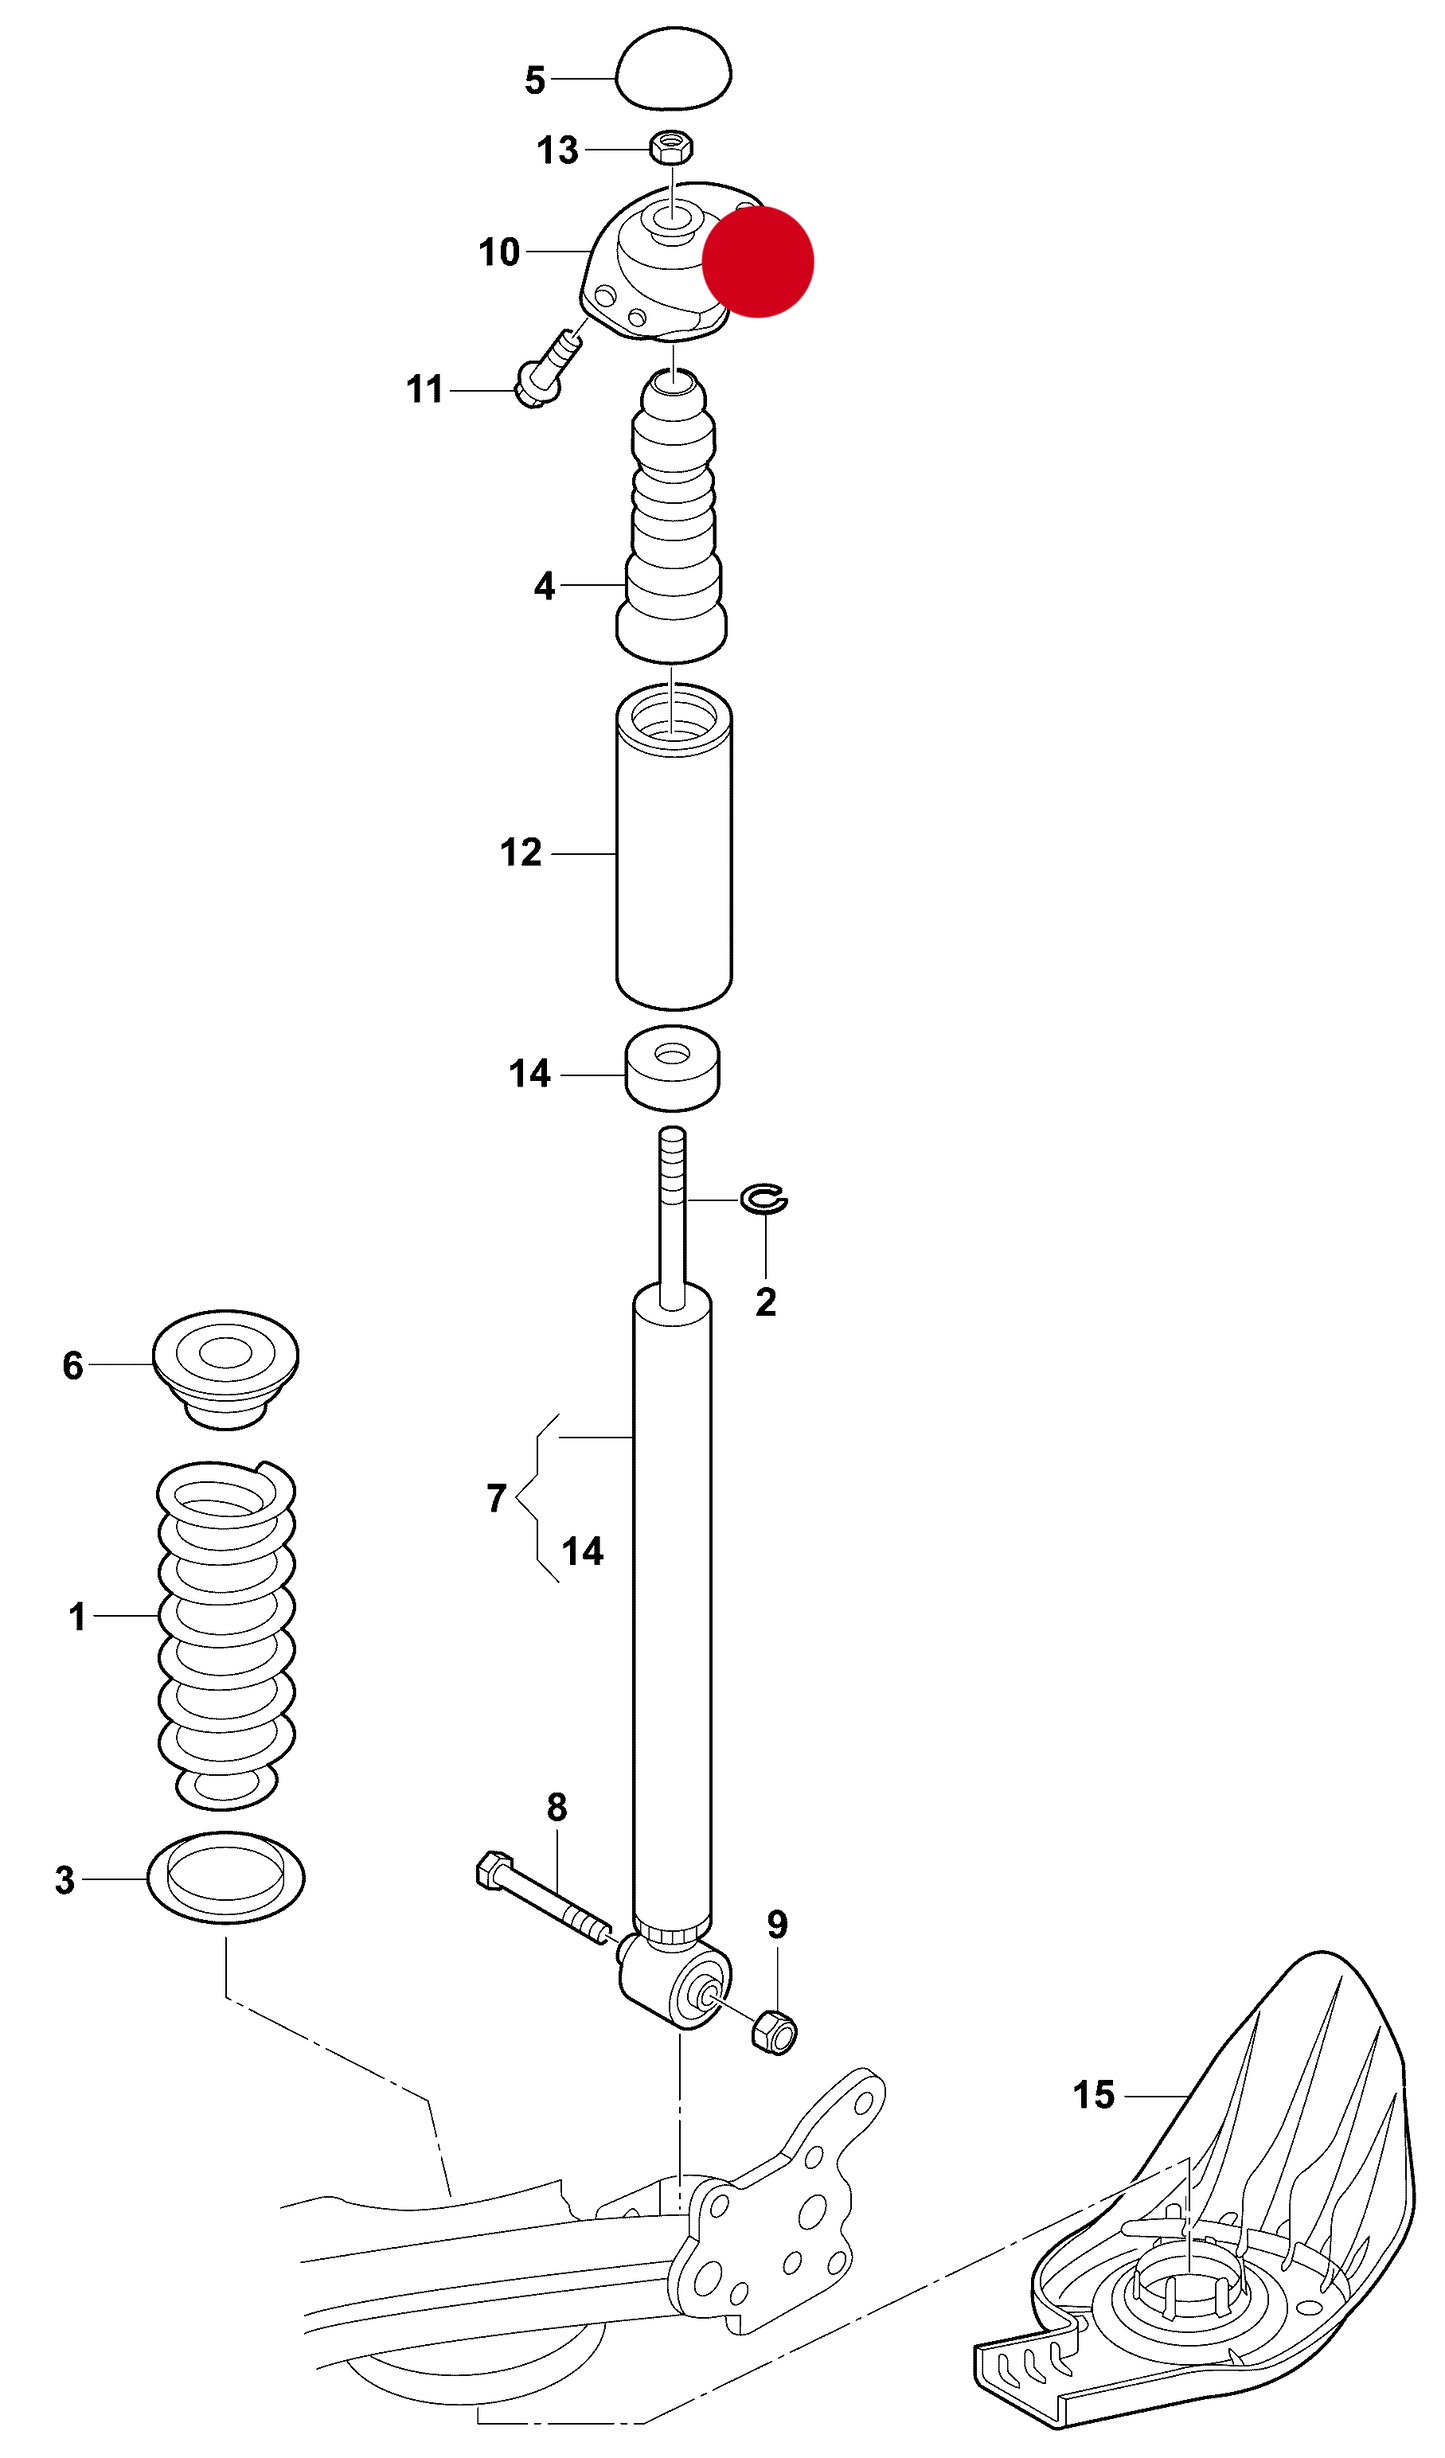 (10) 109878 Rear Suspension Top Strut Mounting 'SPORTS SUSP.' PR-1JC,1JH, UA9,UB1,UB2, UB3,UB6, estate+ PR-1JG ‘Not in stock, but available to order-Usually 1-2 days to us’